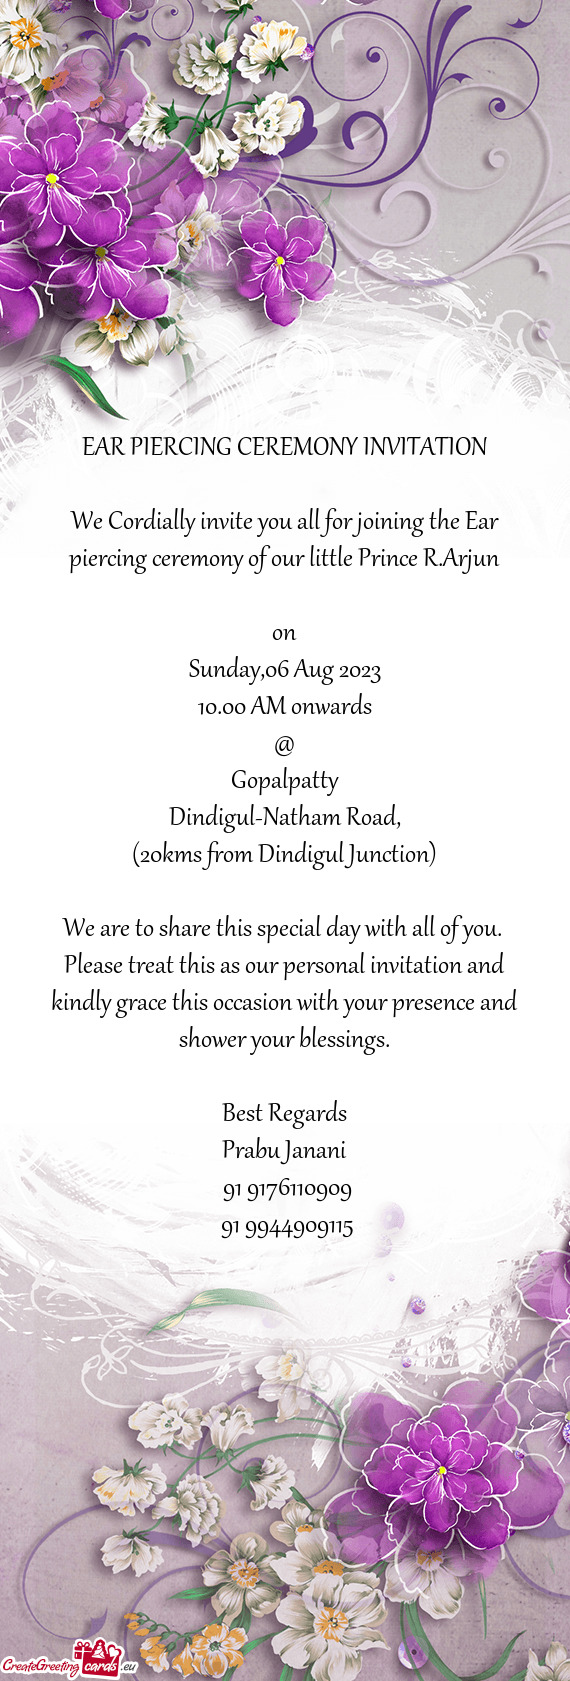 We Cordially invite you all for joining the Ear piercing ceremony of our little Prince R.Arjun